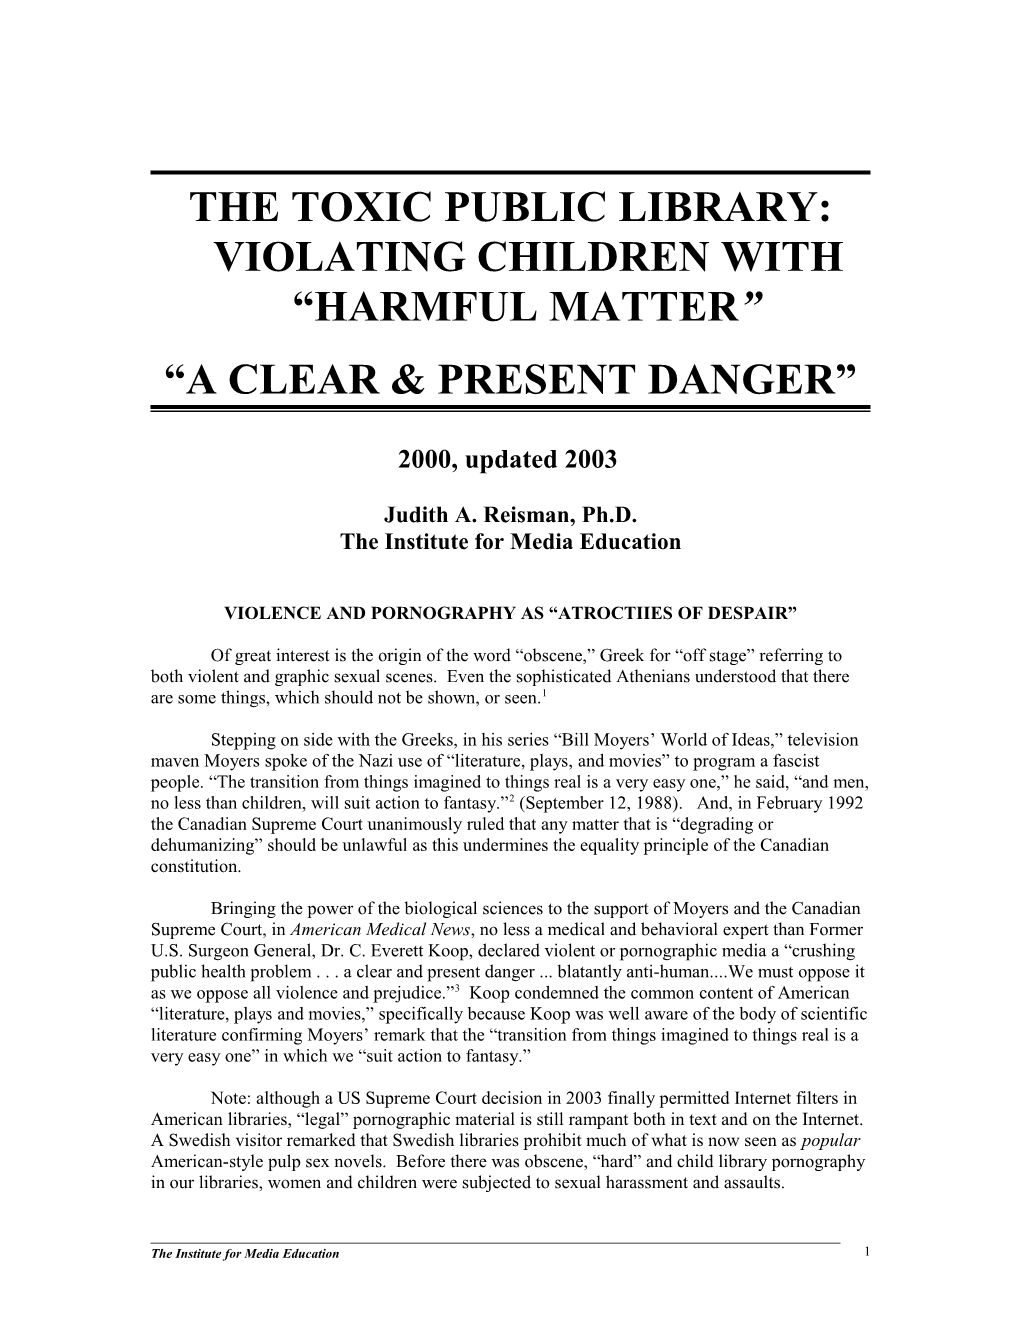 The Toxic American Public Library: Violating Children with Harmful Matter